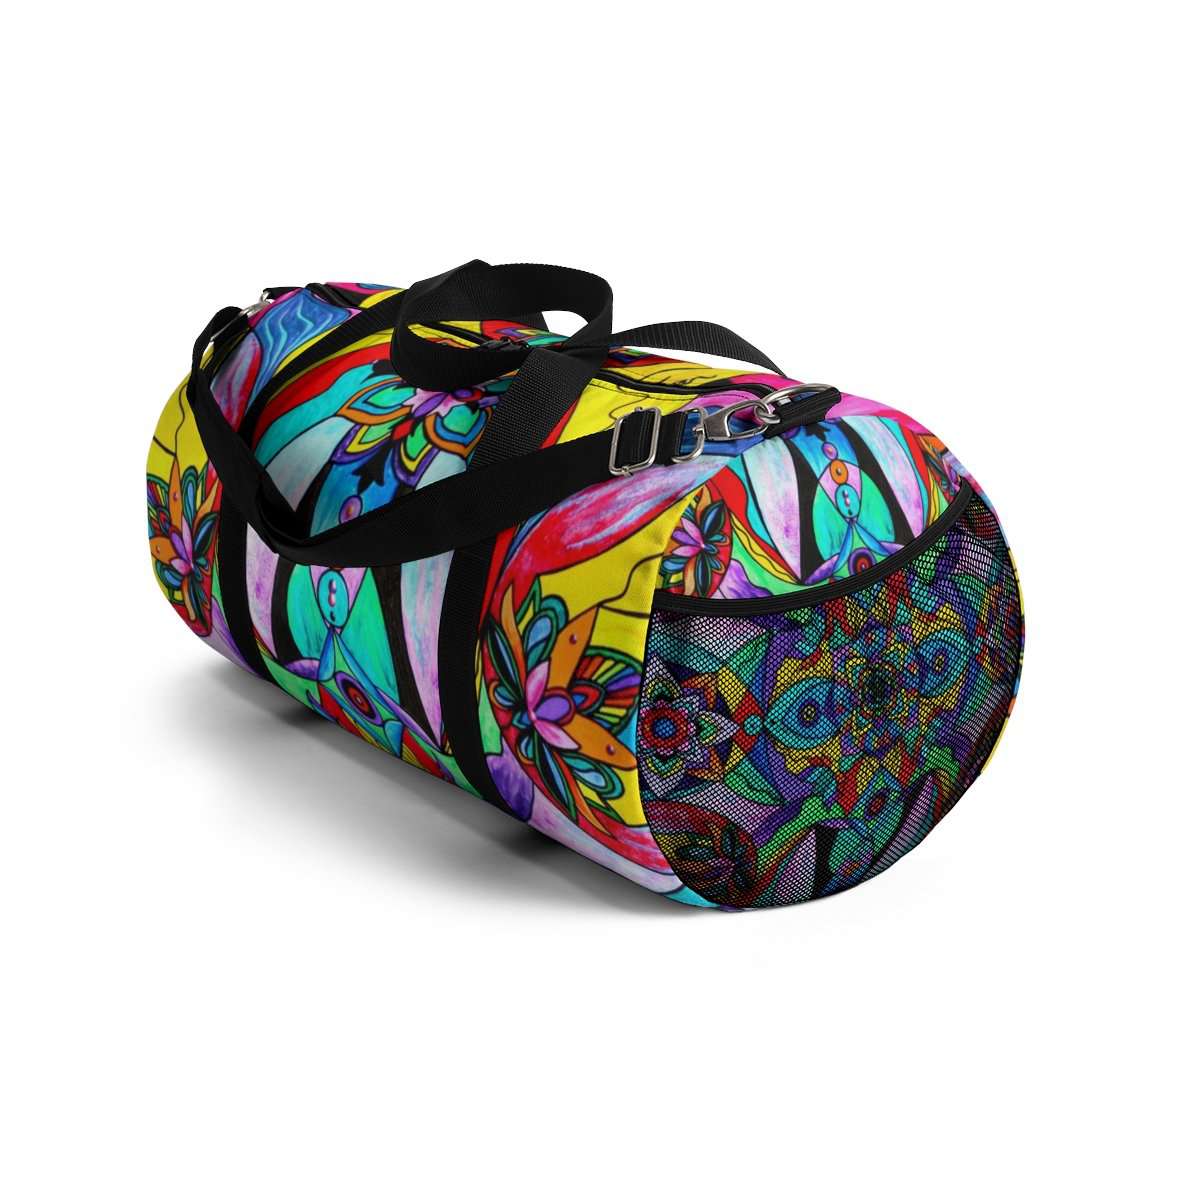 a-place-to-buy-receive-duffle-bag-online-now_8.jpg